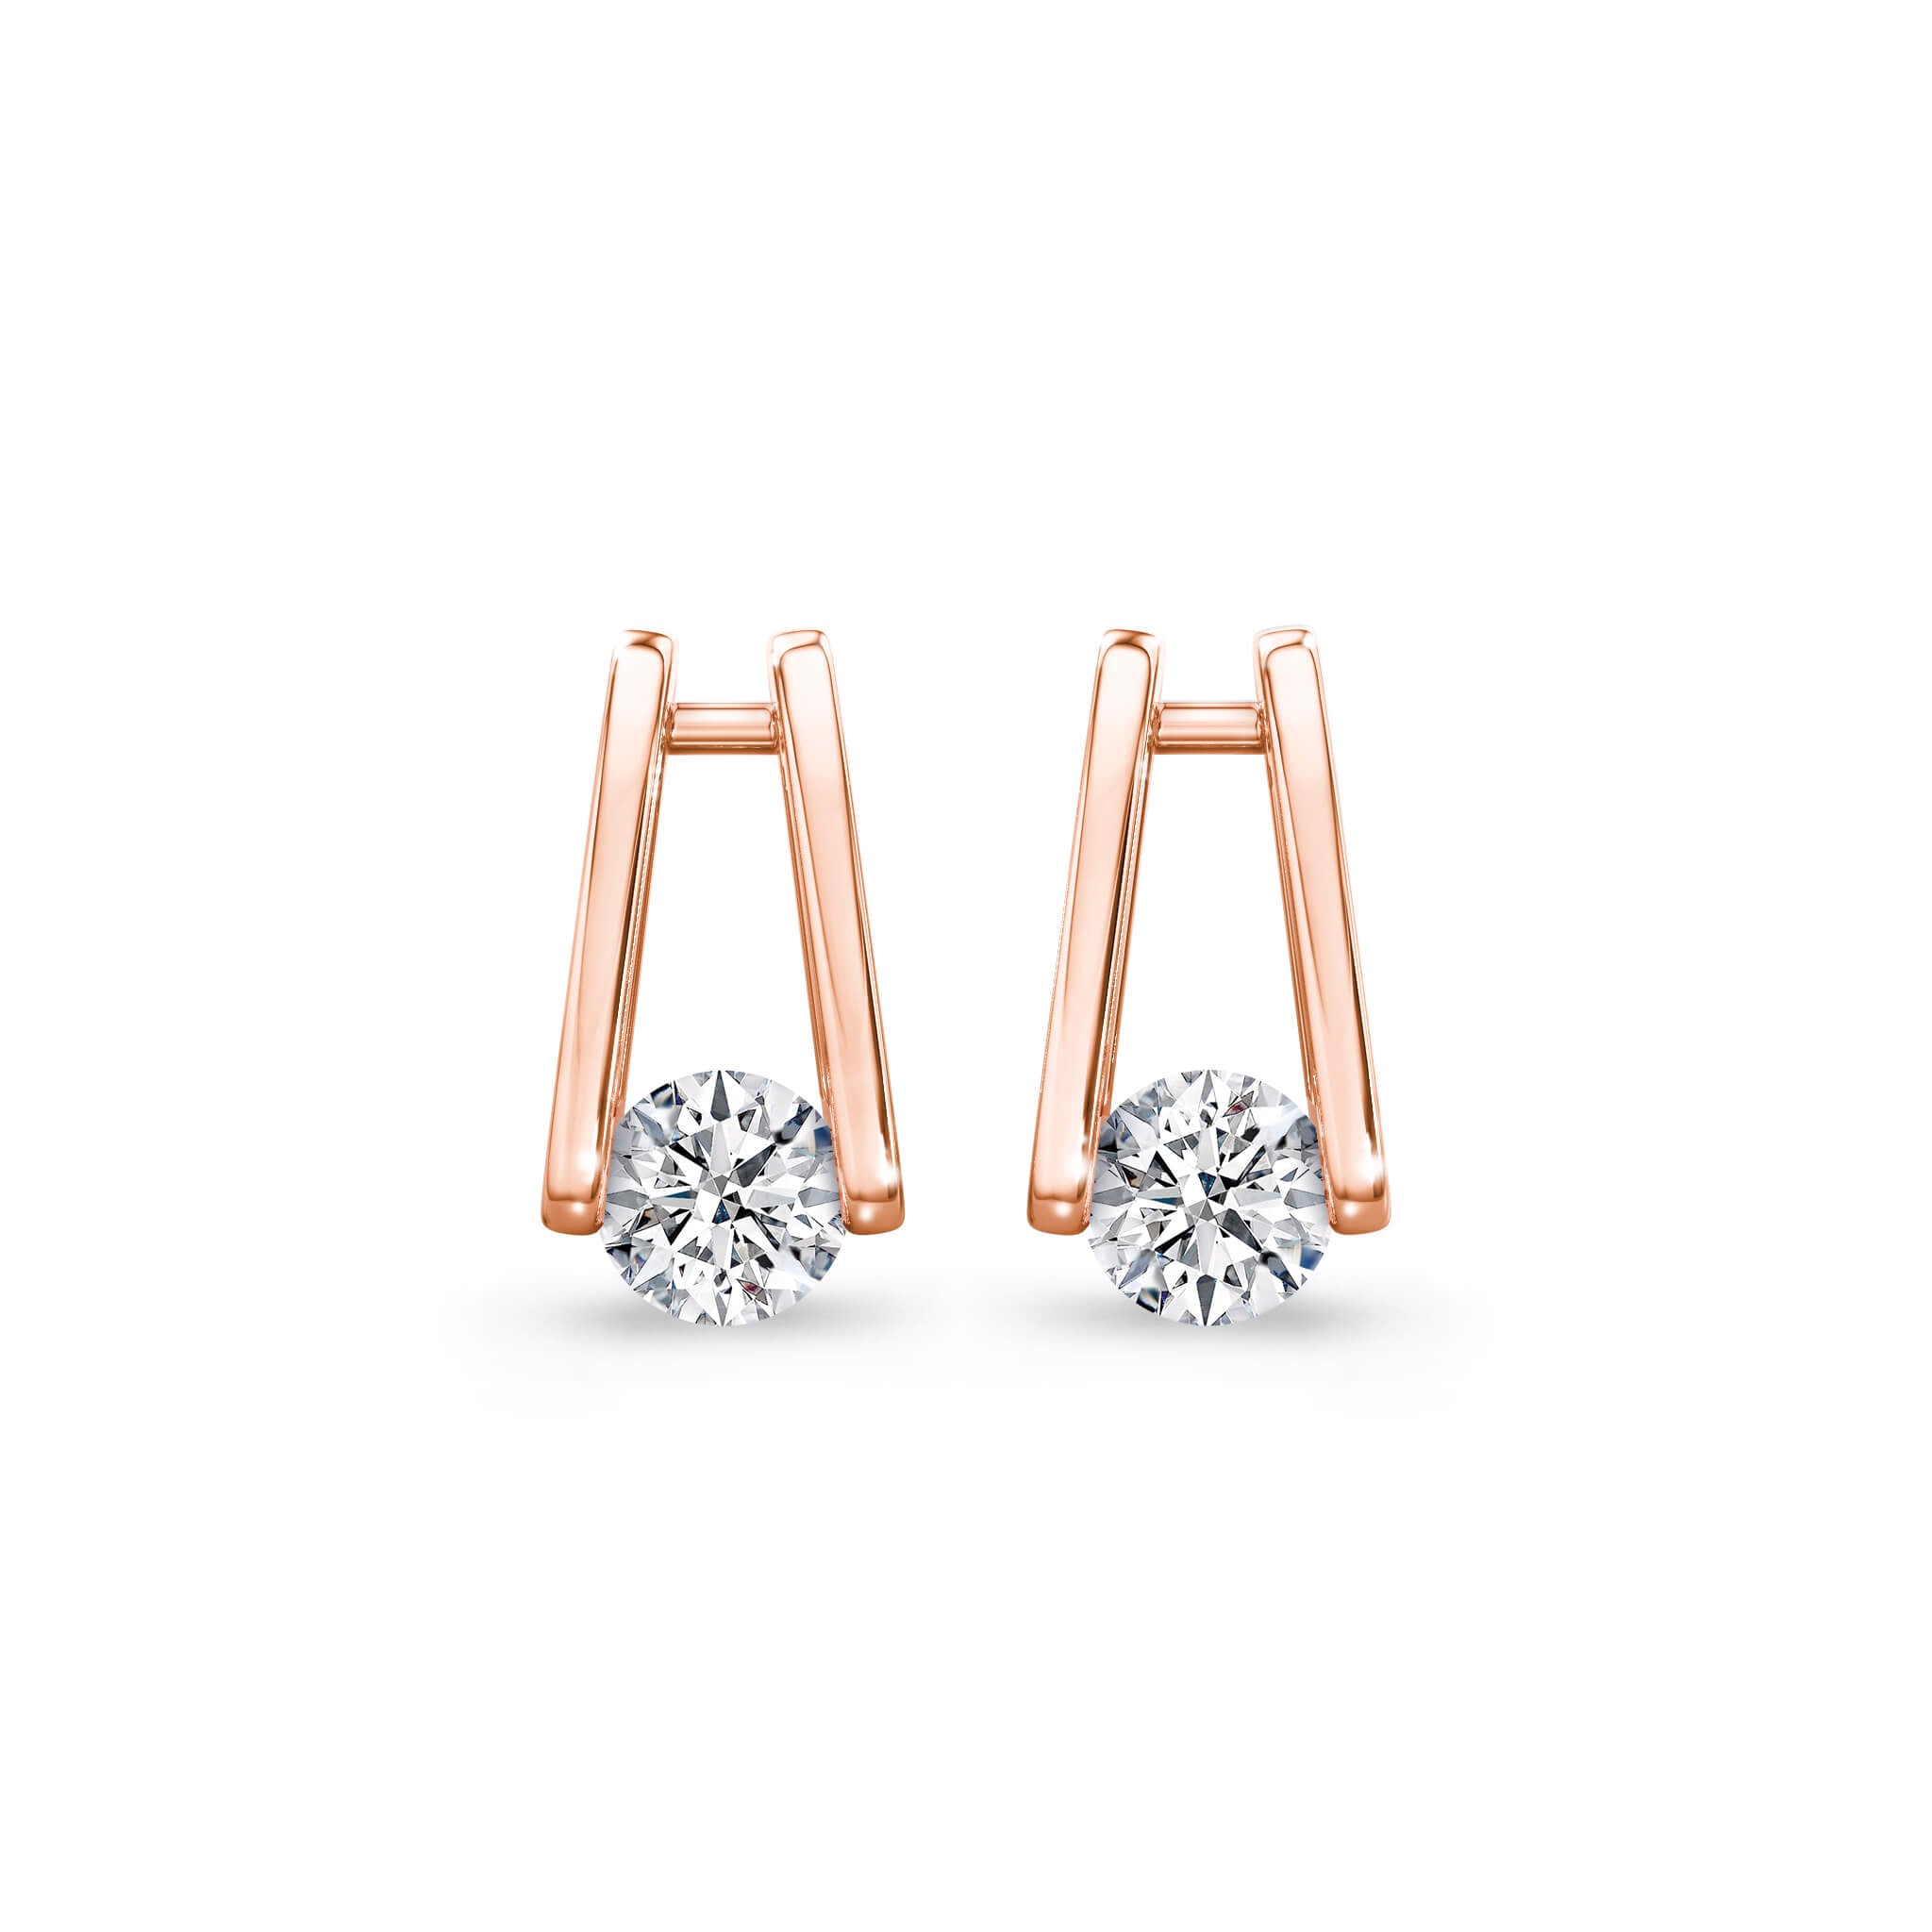 Millennium Classic Diamond Stud Earrings 0.50 Carat in 18K Rose Gold Front View